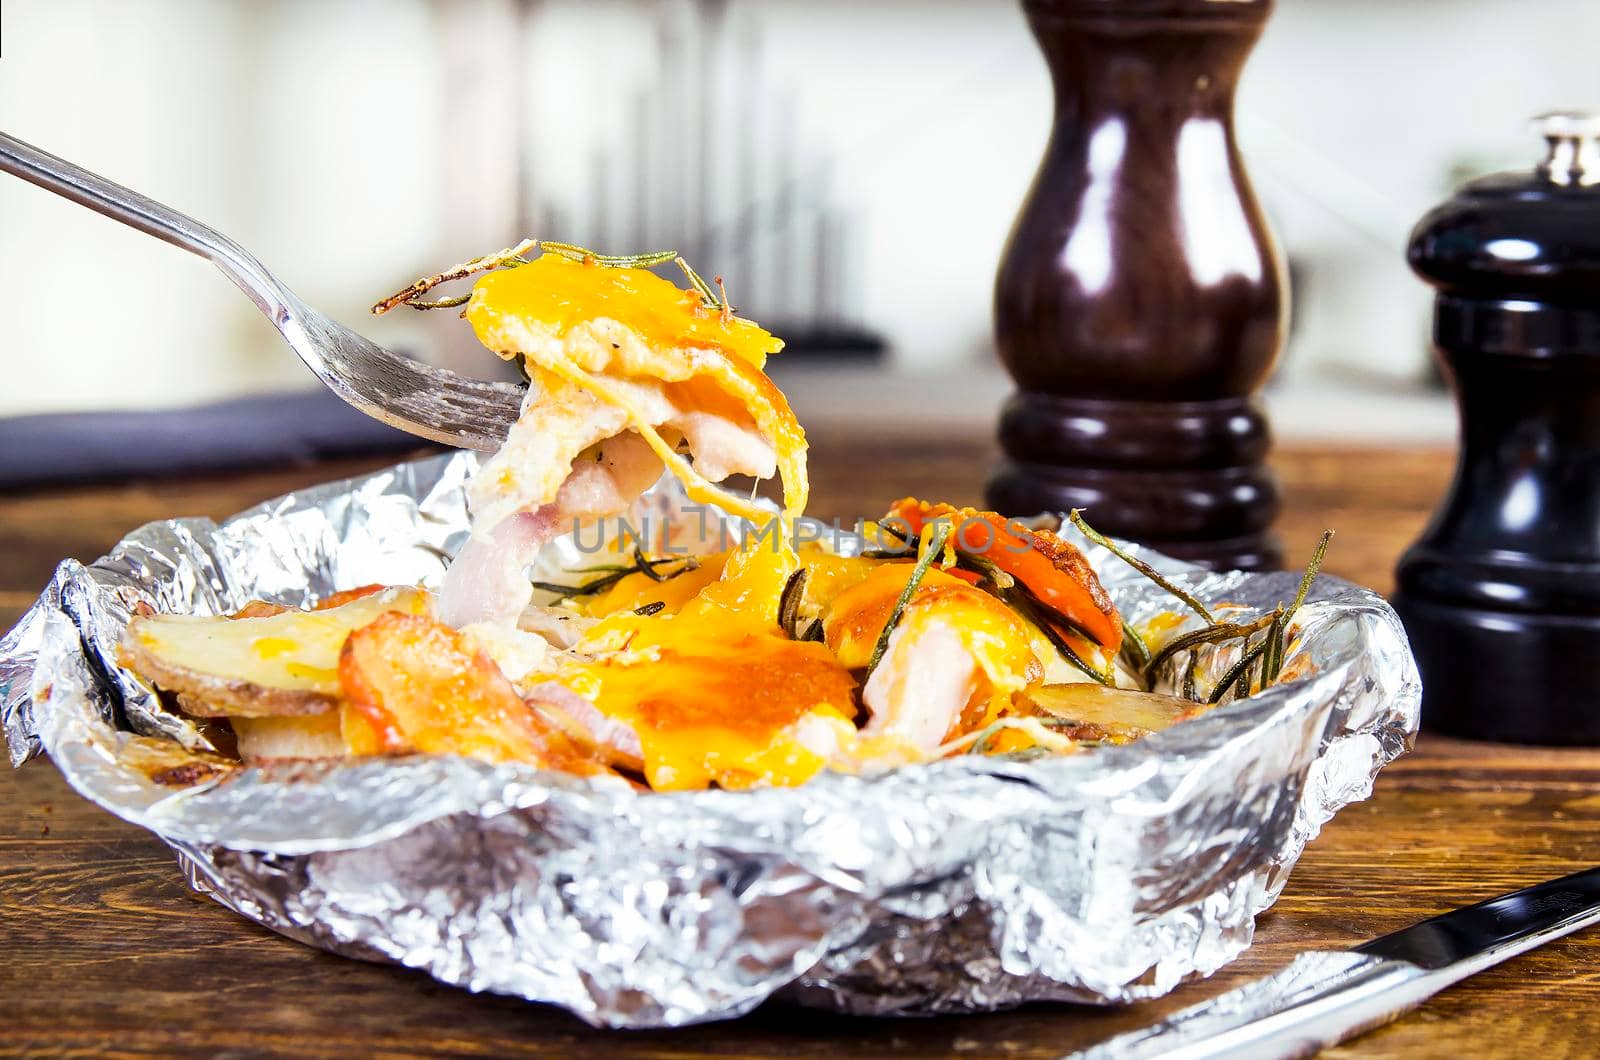 Meat with vegetables in foil. Wooden background.